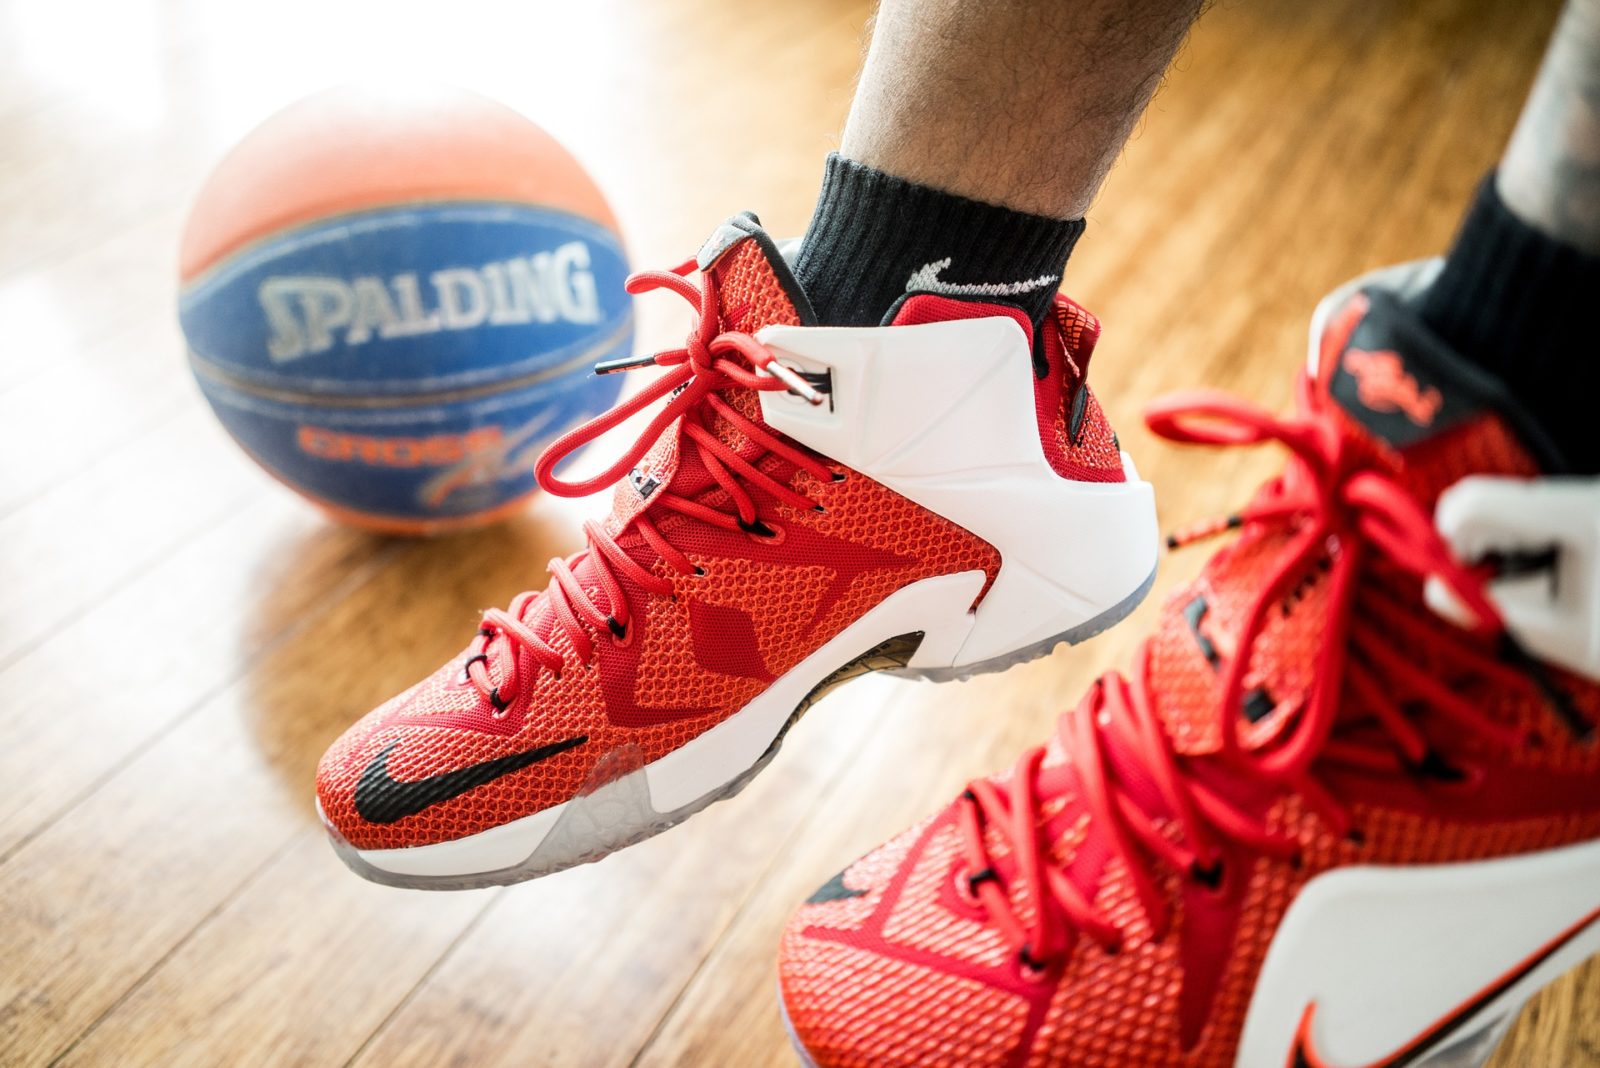 Best basketball shoes for wide feet